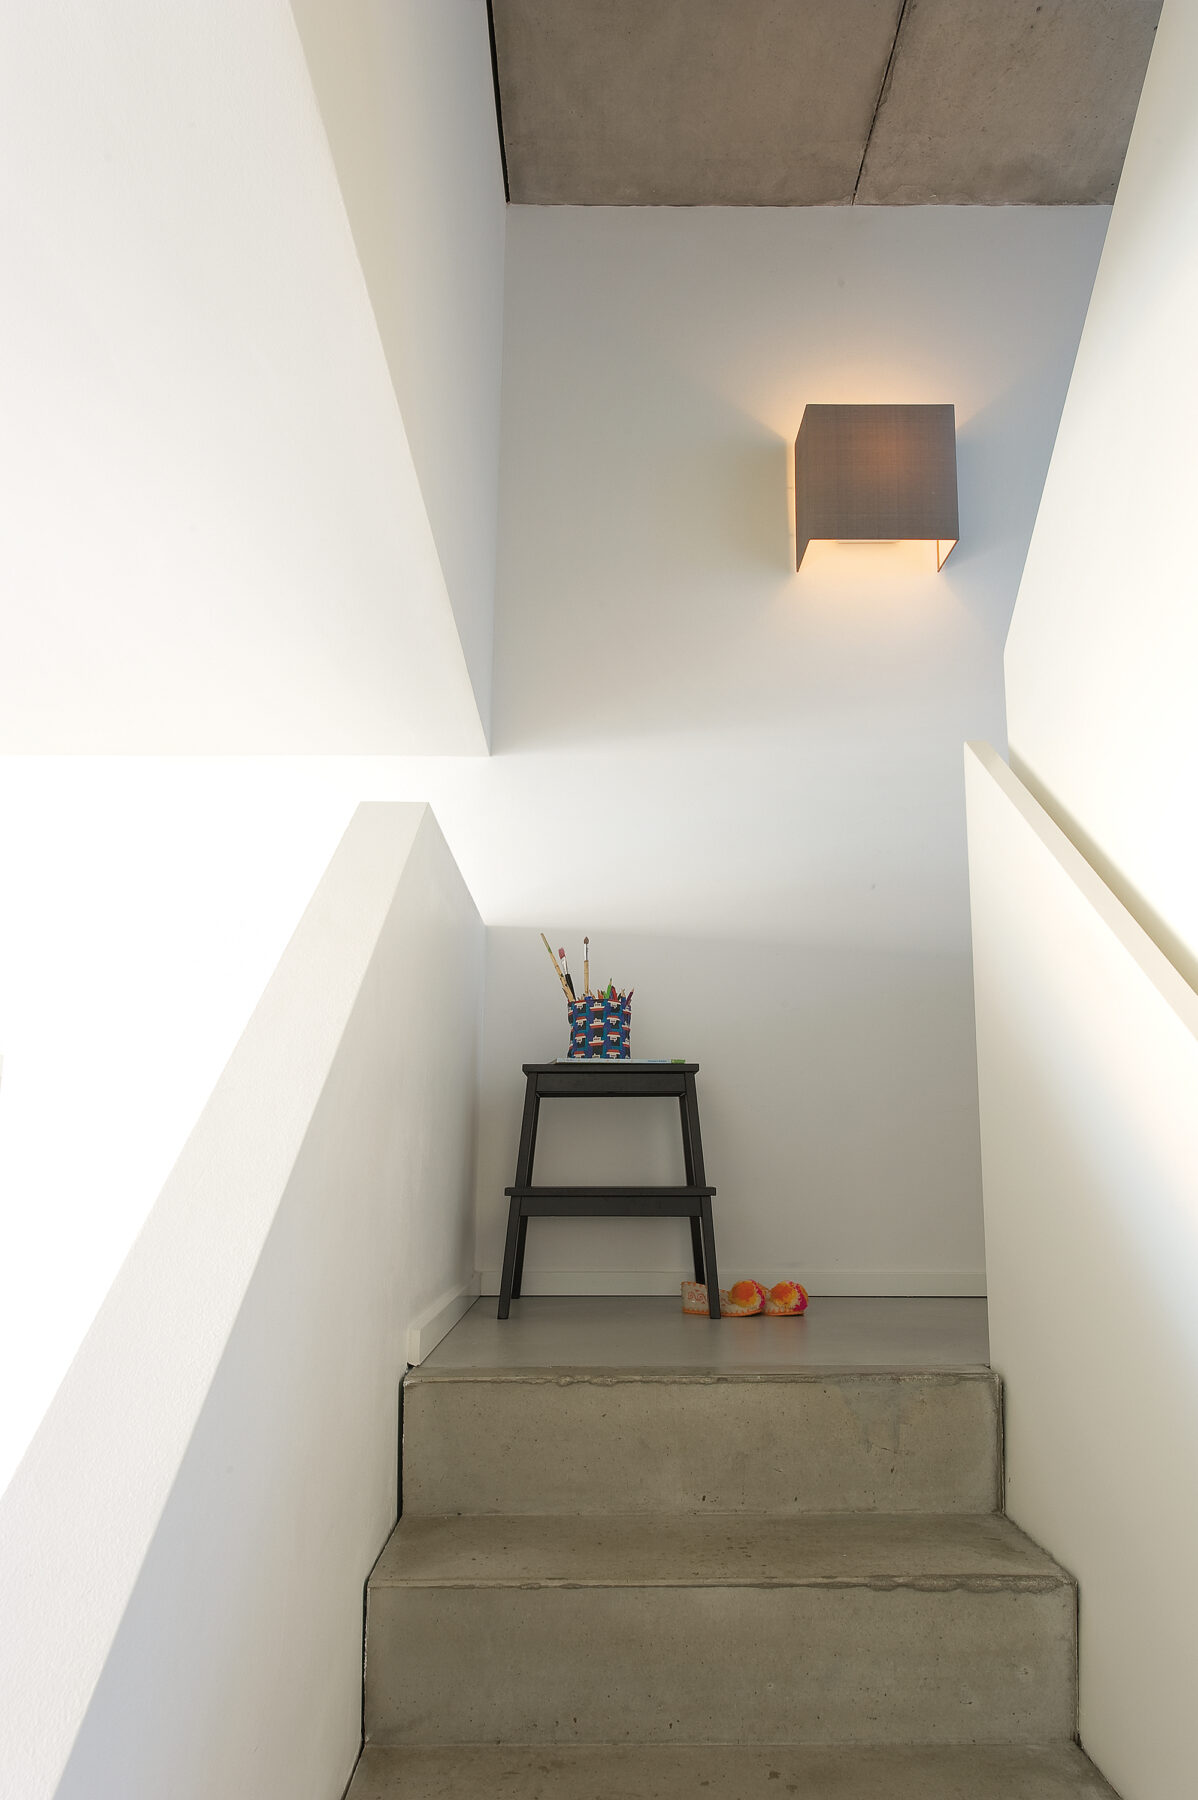 CUBIC BOX wall lamp in an open staircase of a bright flat.